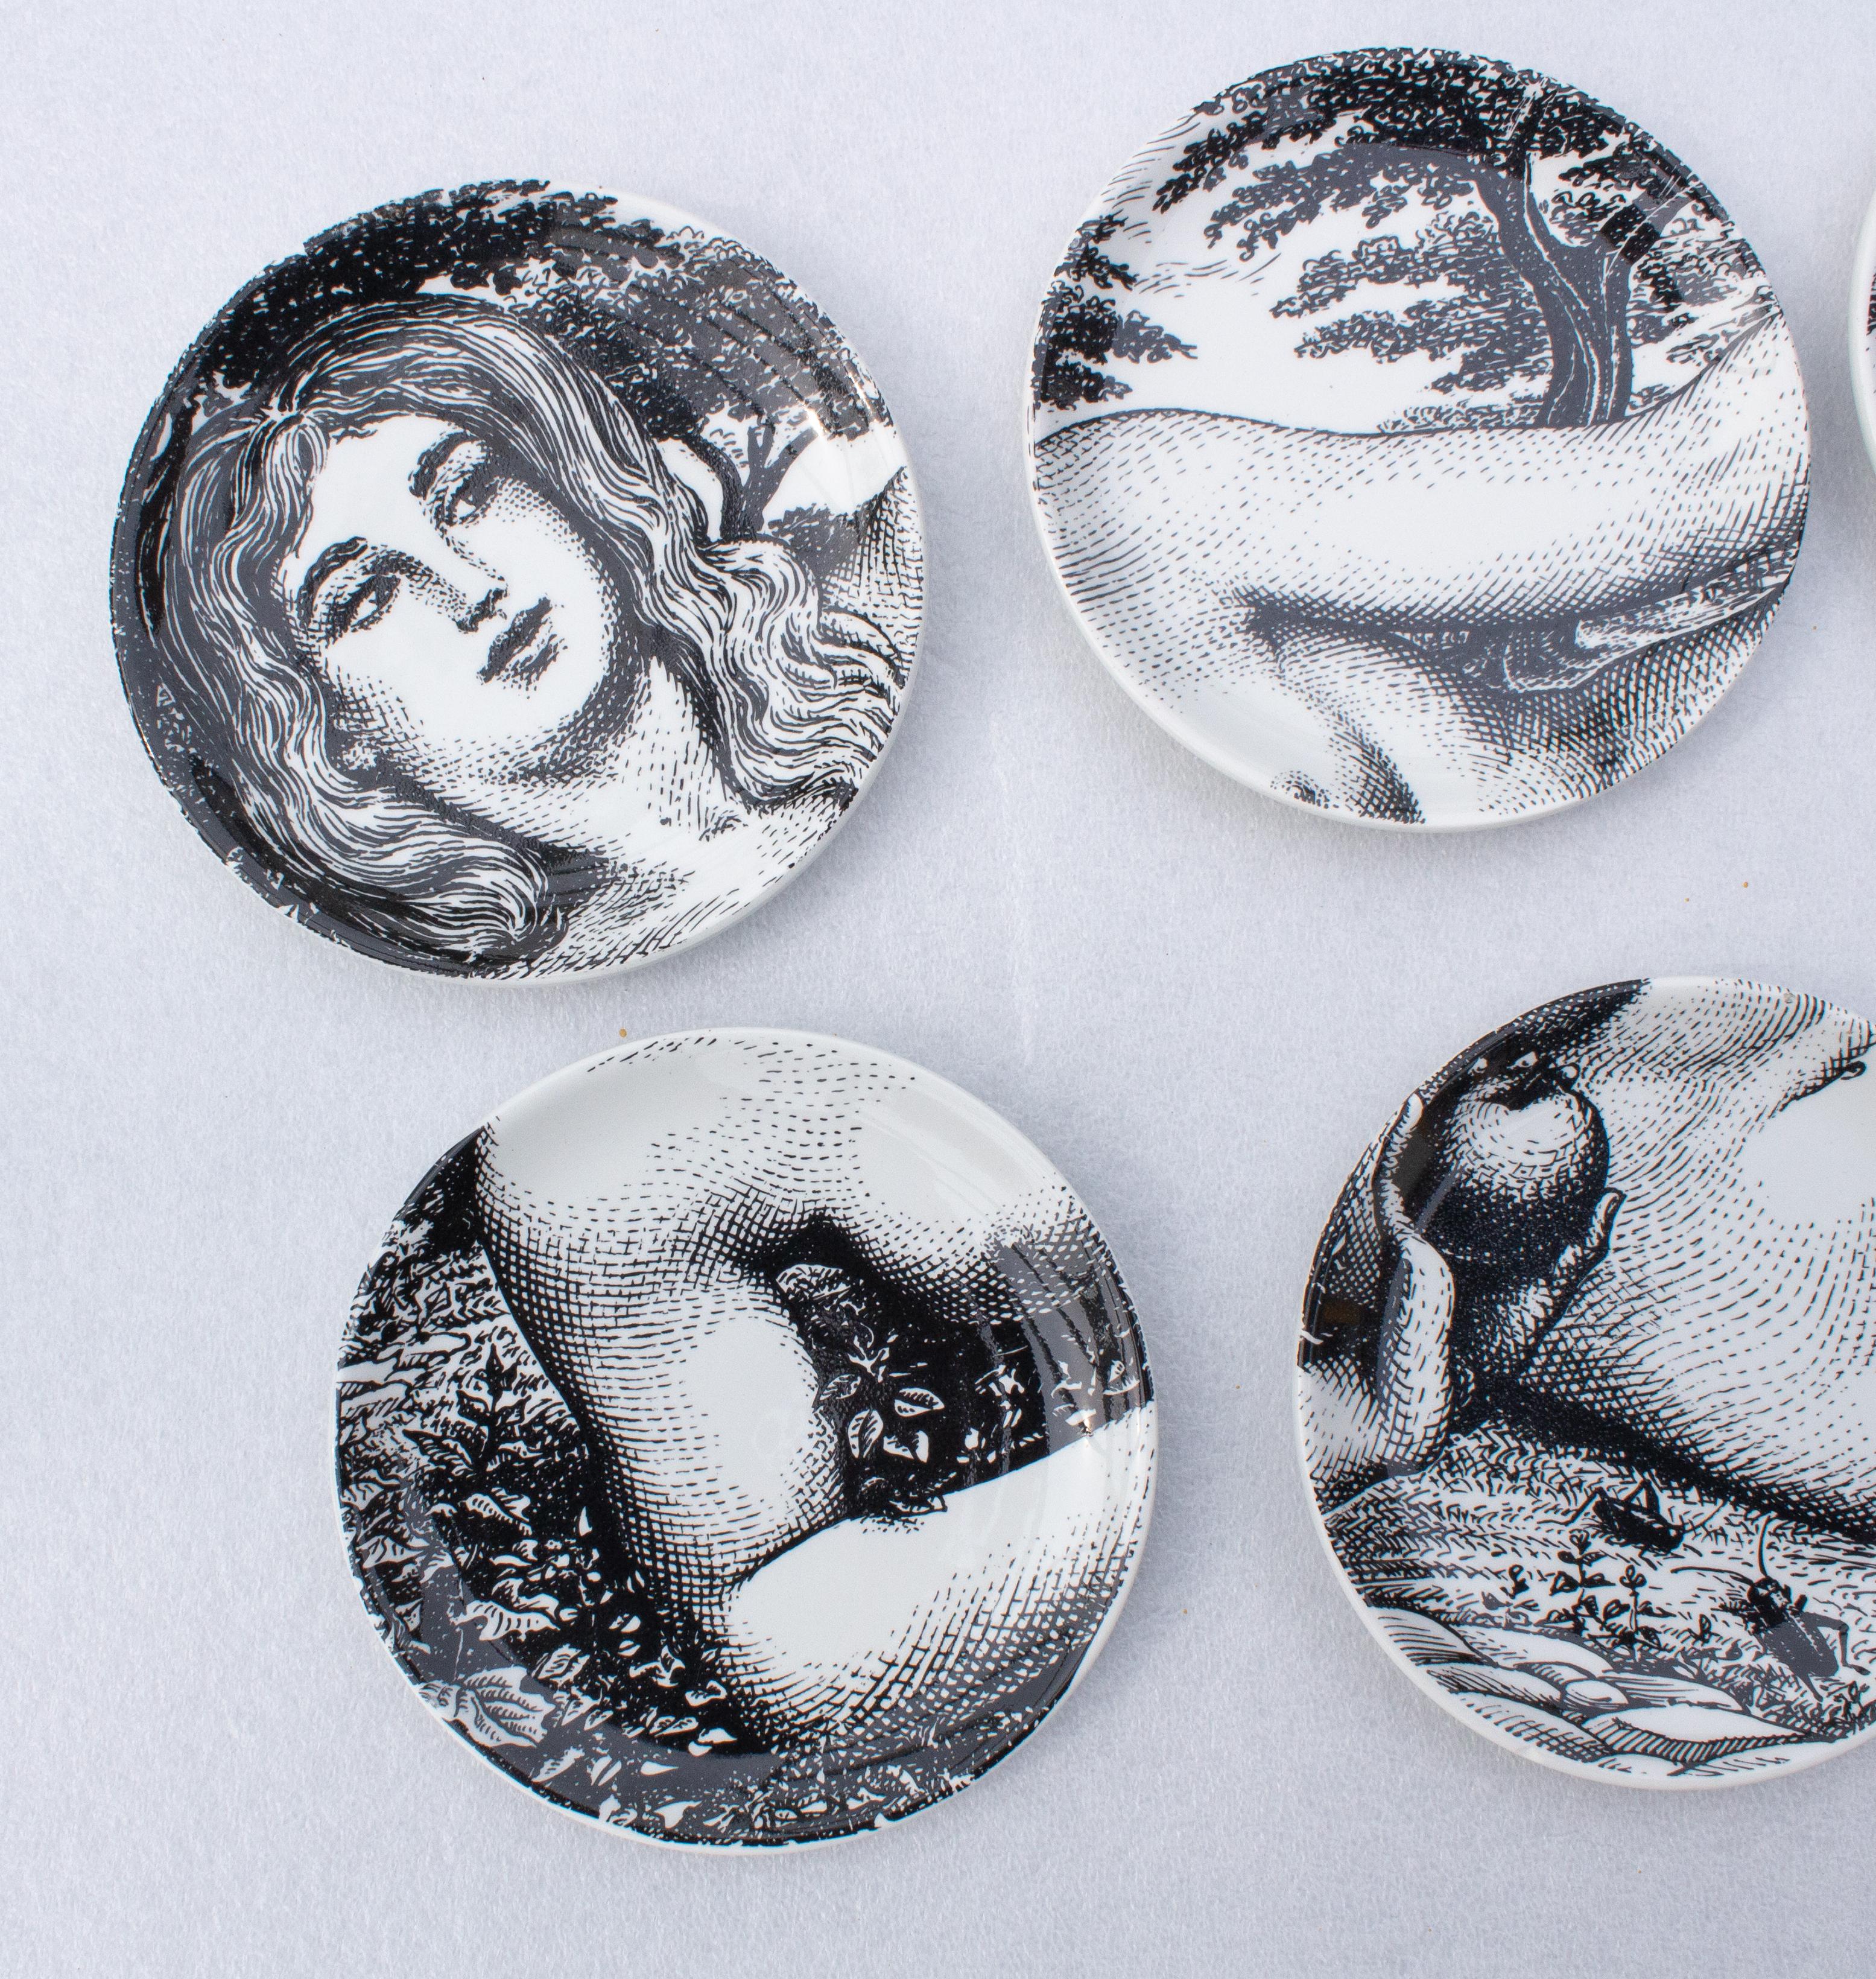 Porcelain Fornasetti Ceramic Bar Box Set of Eight Coasters Picturing 